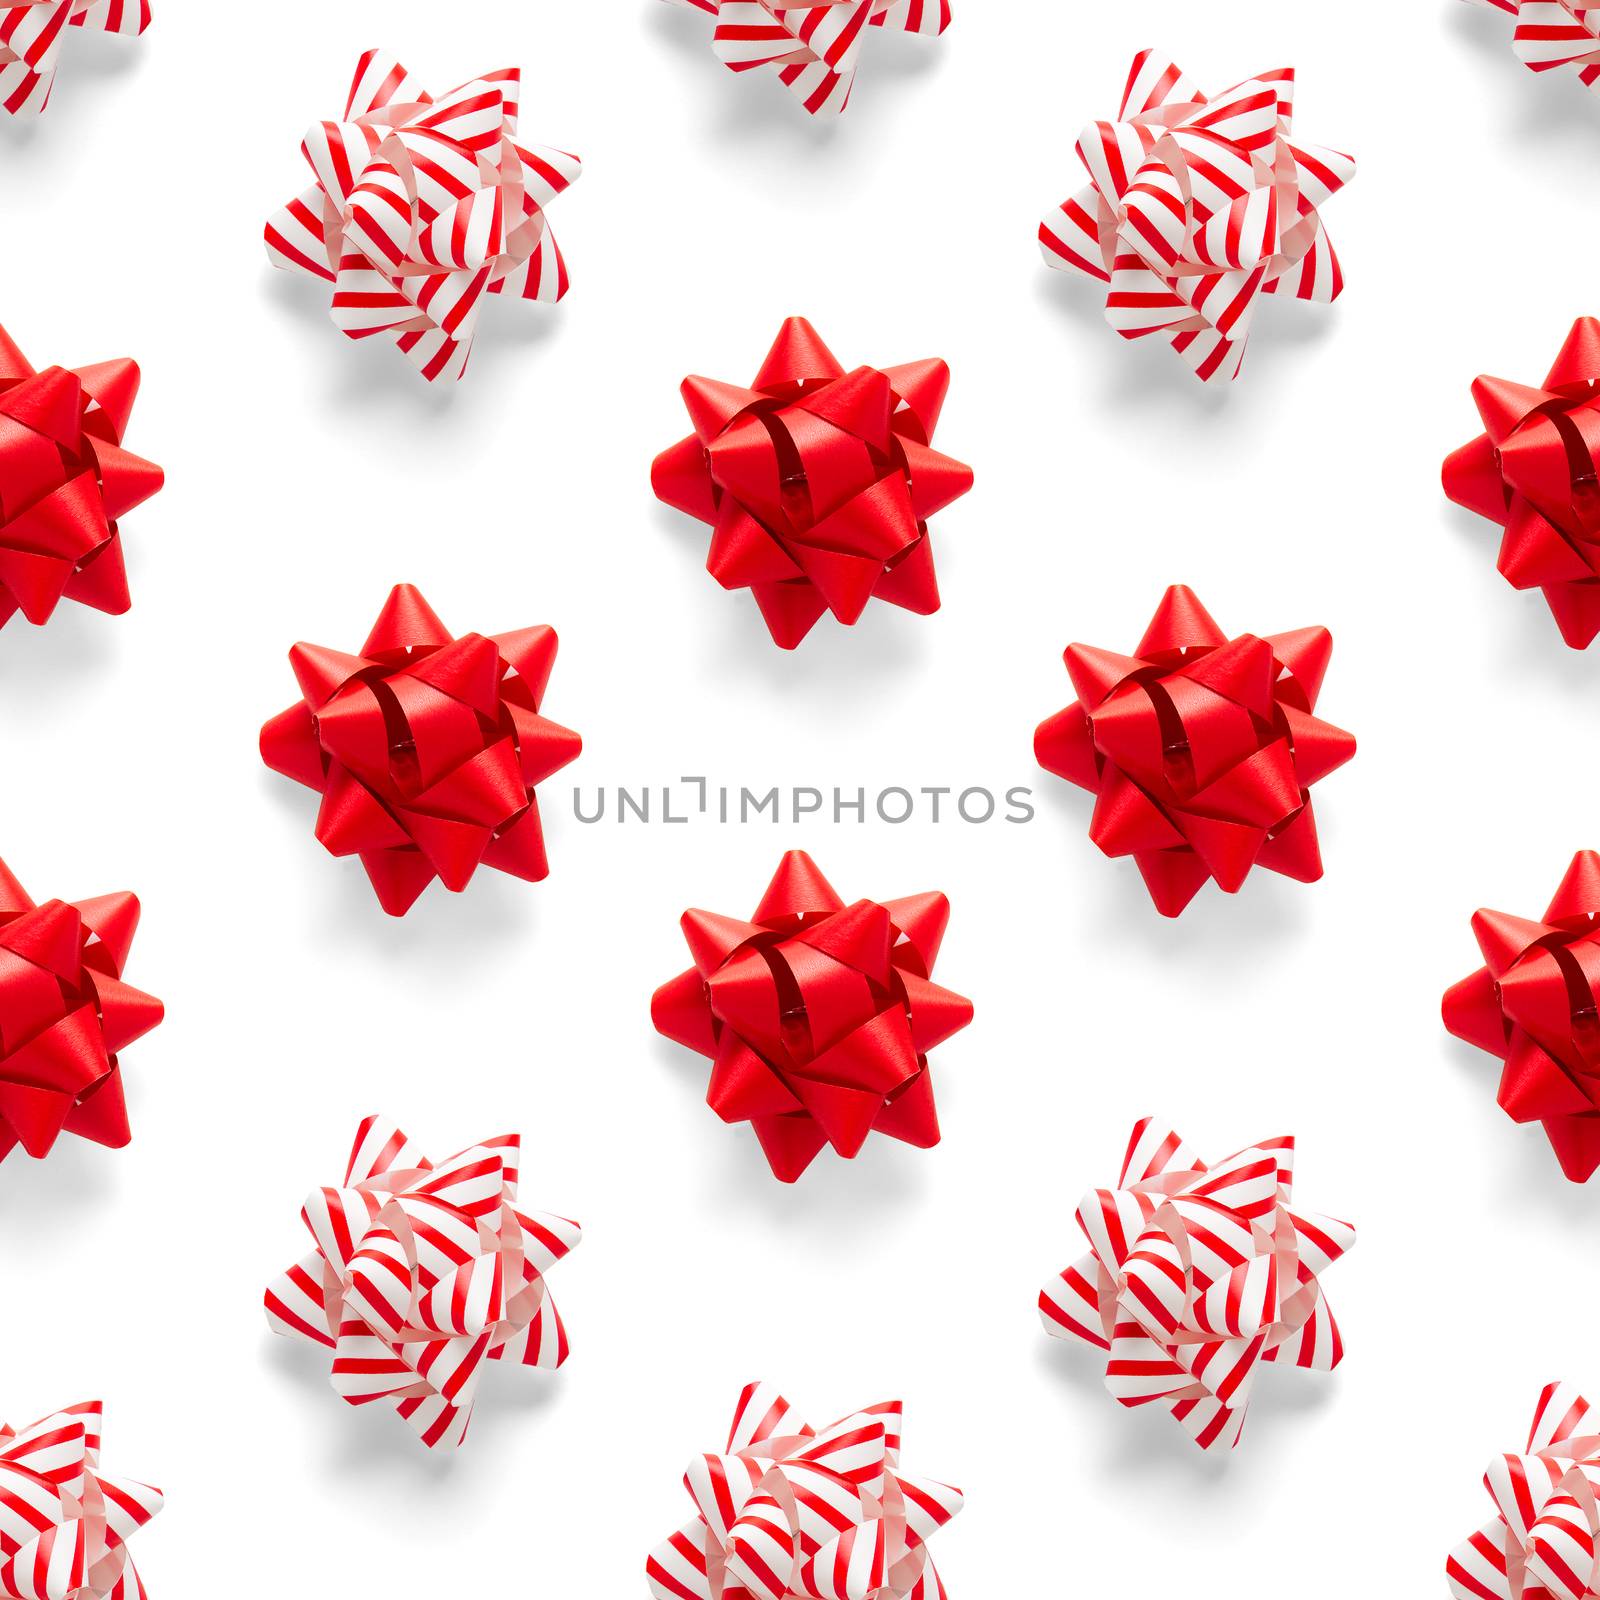 Seamless regular creative Christmas pattern with New Year decorations on white background. xmas Modern Seamless pattern made from christmas decorations. Photo quality pattern for fabric, prints, wallpapers, banners or creative design works.